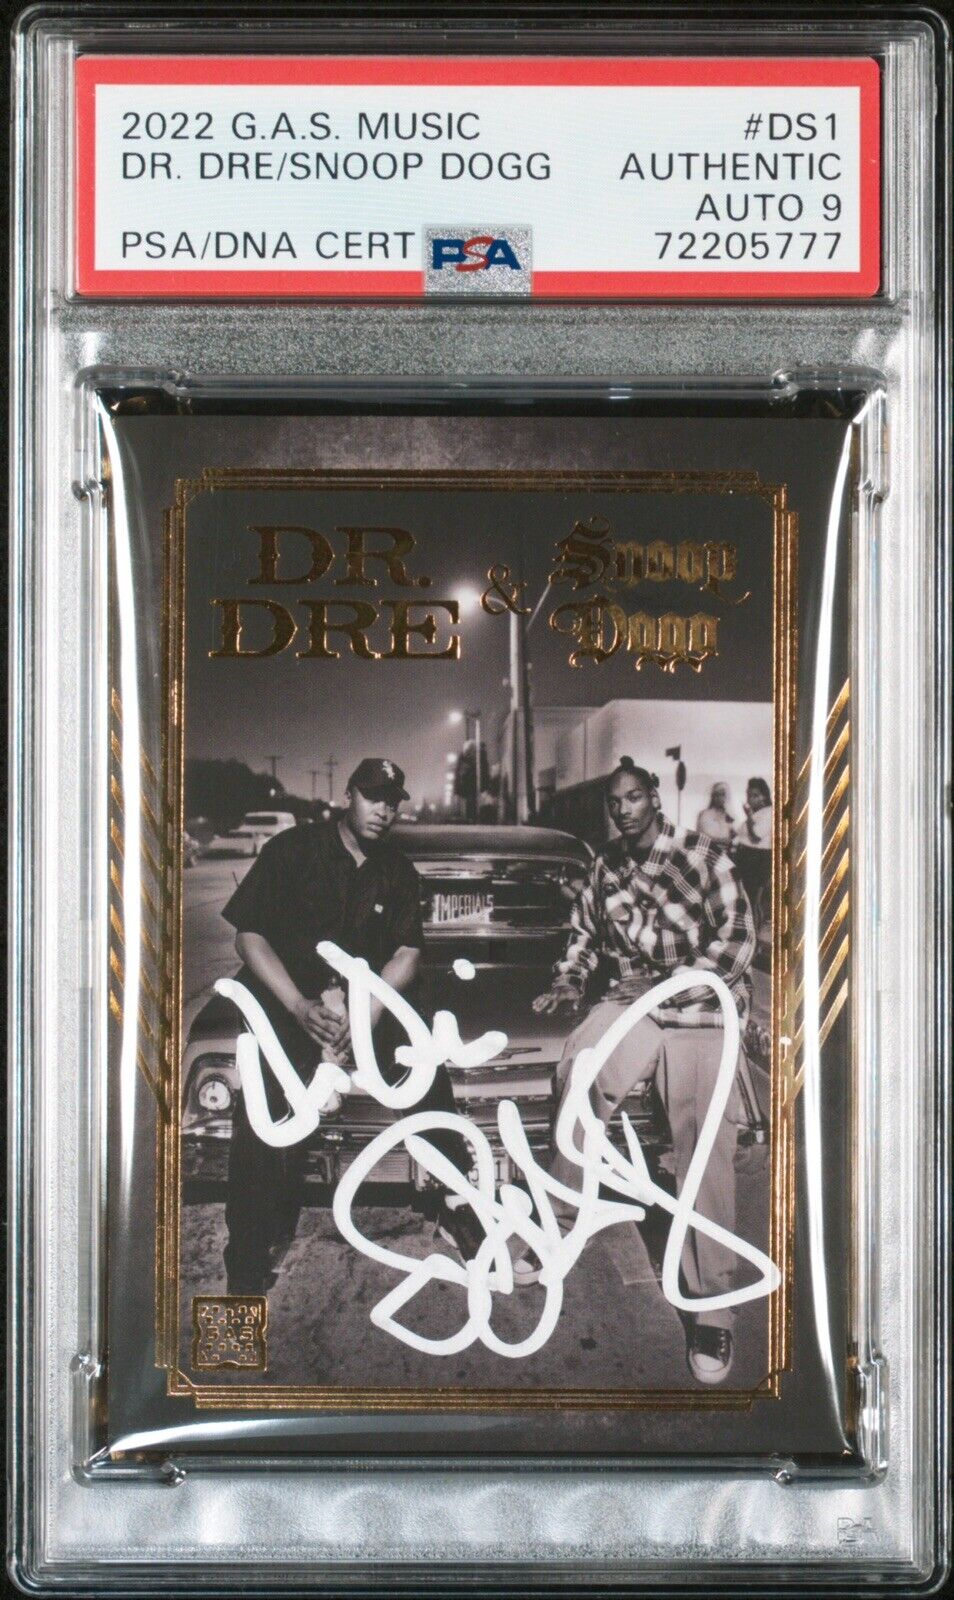 Dr. Dre & Snoop Dogg Signed 2022 G.A.S. Music Card #DS1 Psa/Dna Dual MINT 9 AUTO